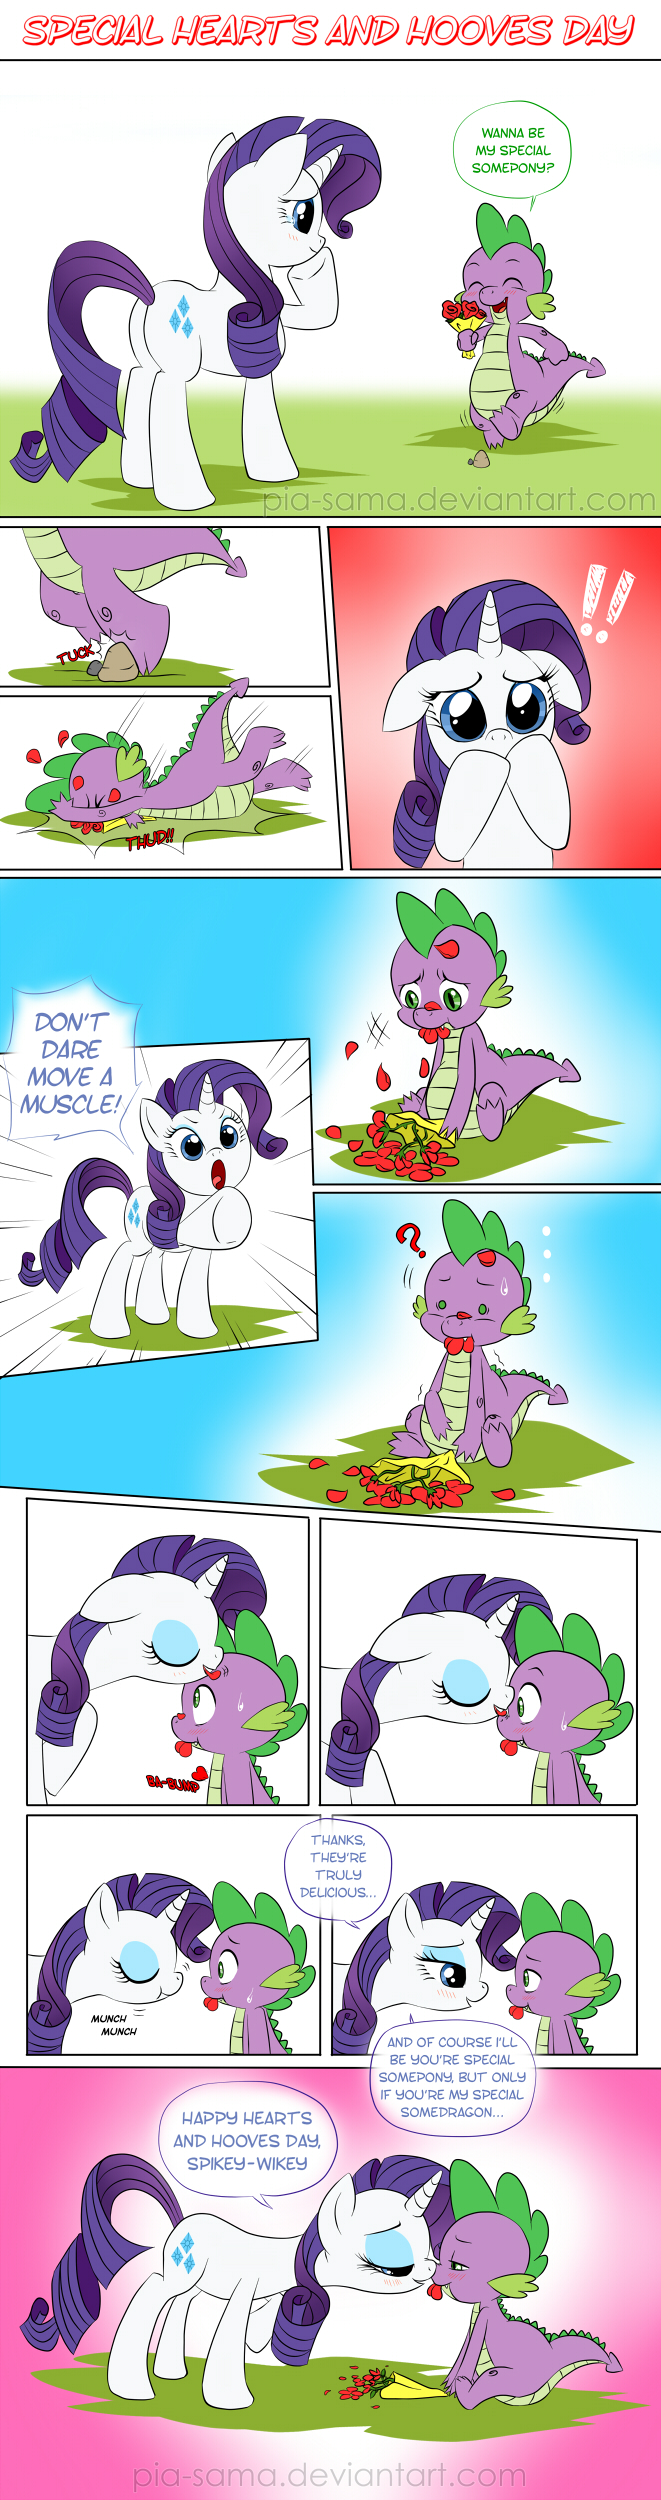 special_hearts_and_hooves_day_by_pia_sam